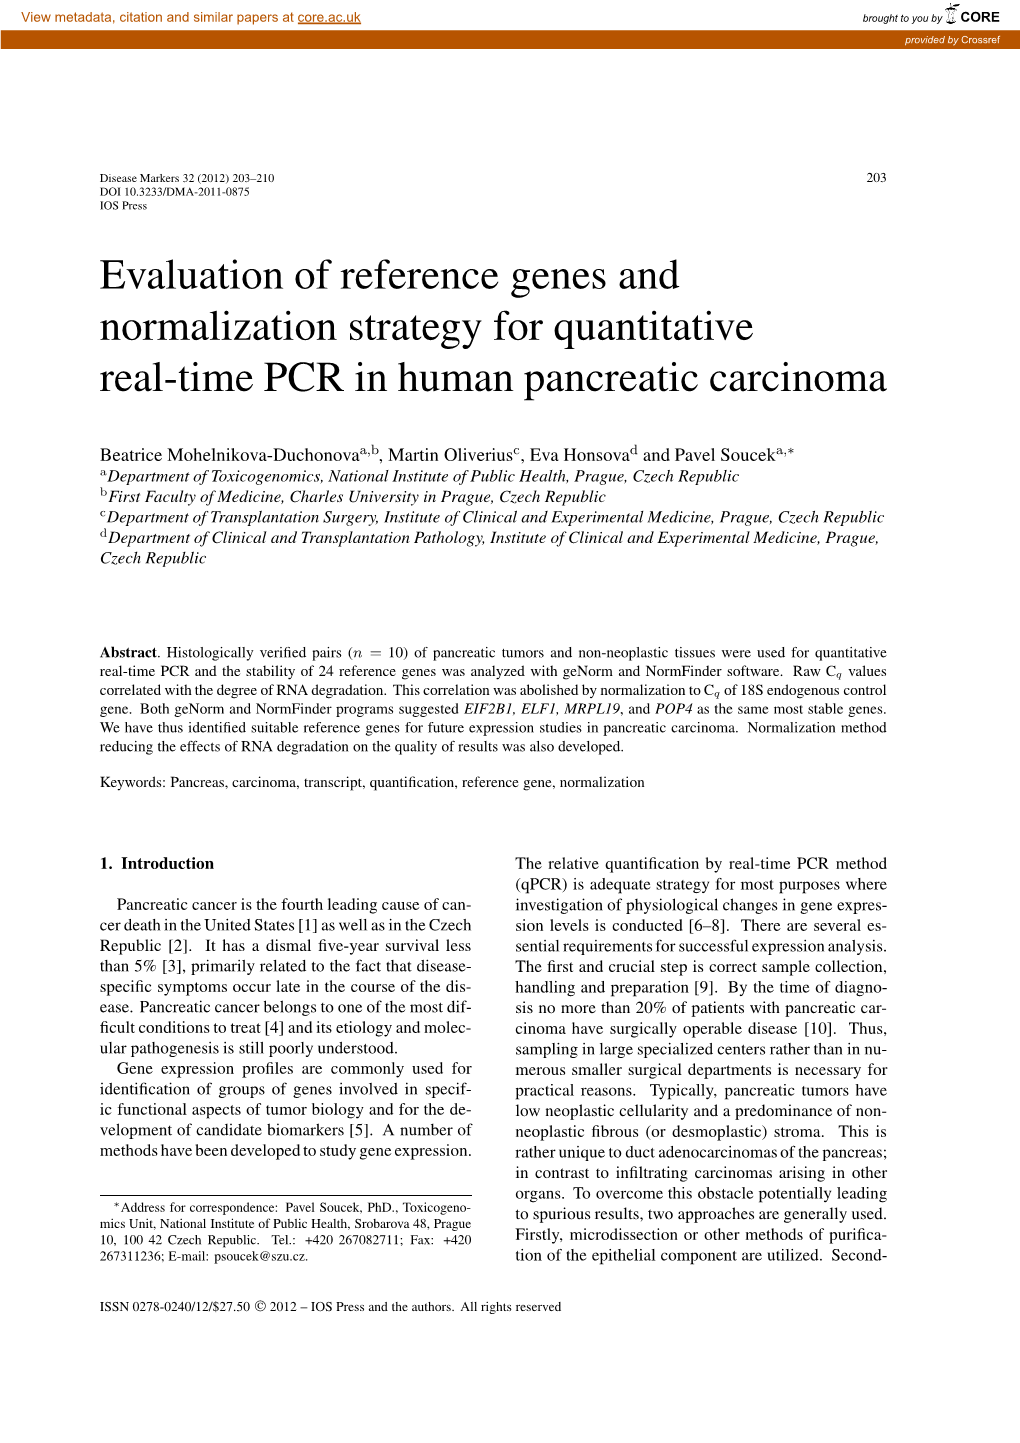 Evaluation of Reference Genes and Normalization Strategy for Quantitative Real-Time PCR in Human Pancreatic Carcinoma